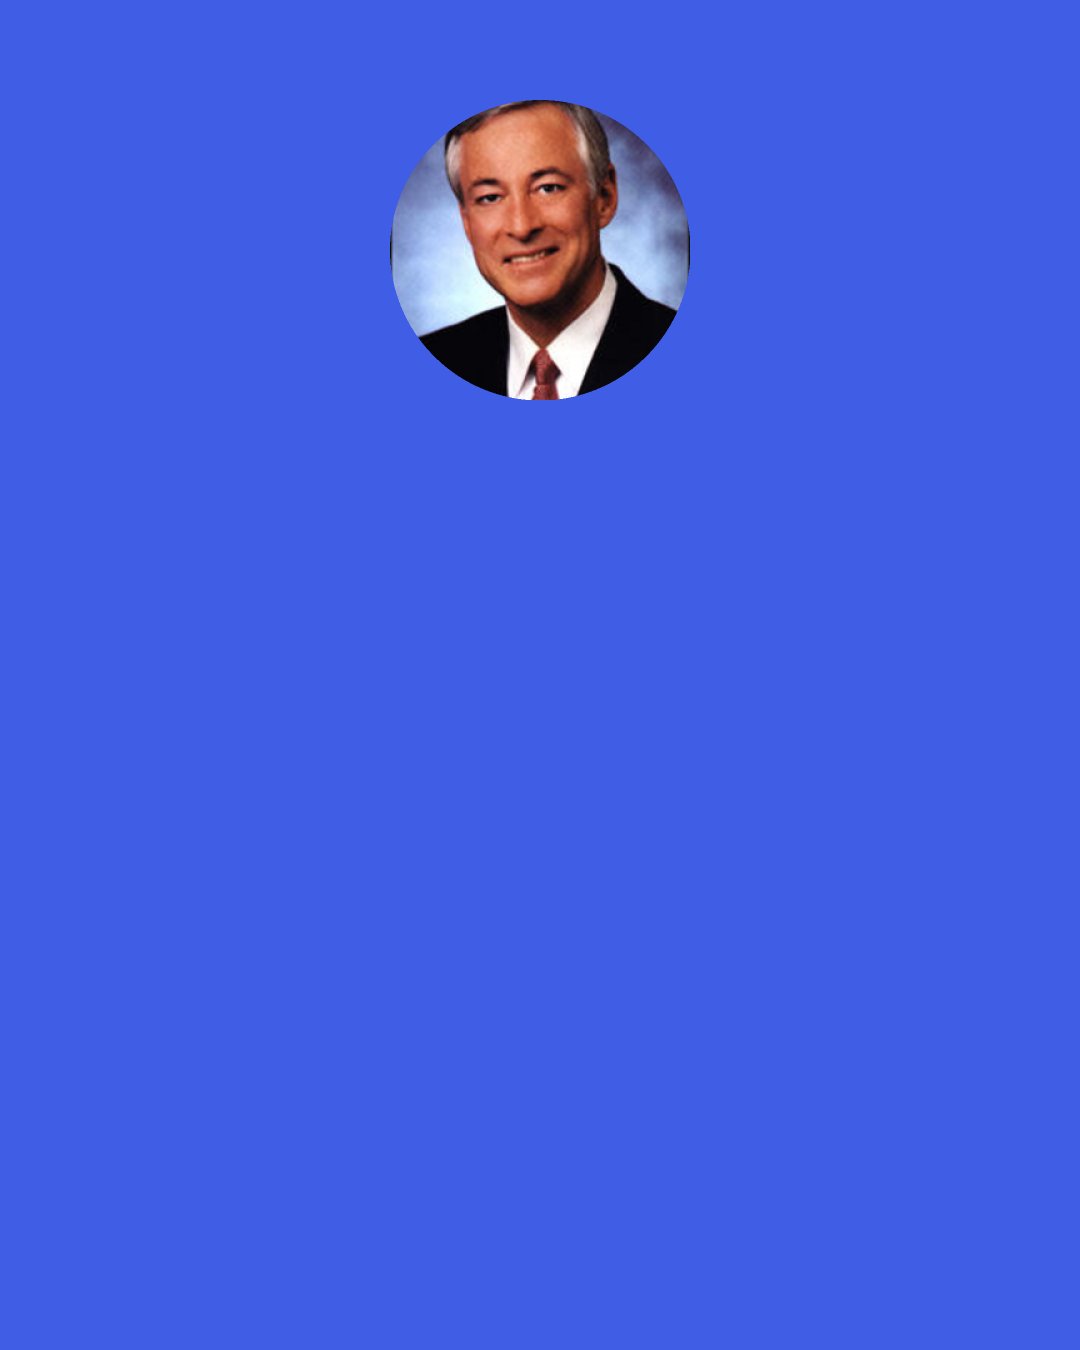 Brian Tracy: I work with people who come up with an idea and people throw money at it. They say, "Geeze, can I give you some money? Can I get a piece of that?" So, if your concept is good everything else becomes much easier. If your concept is unclear, then everything else is harder